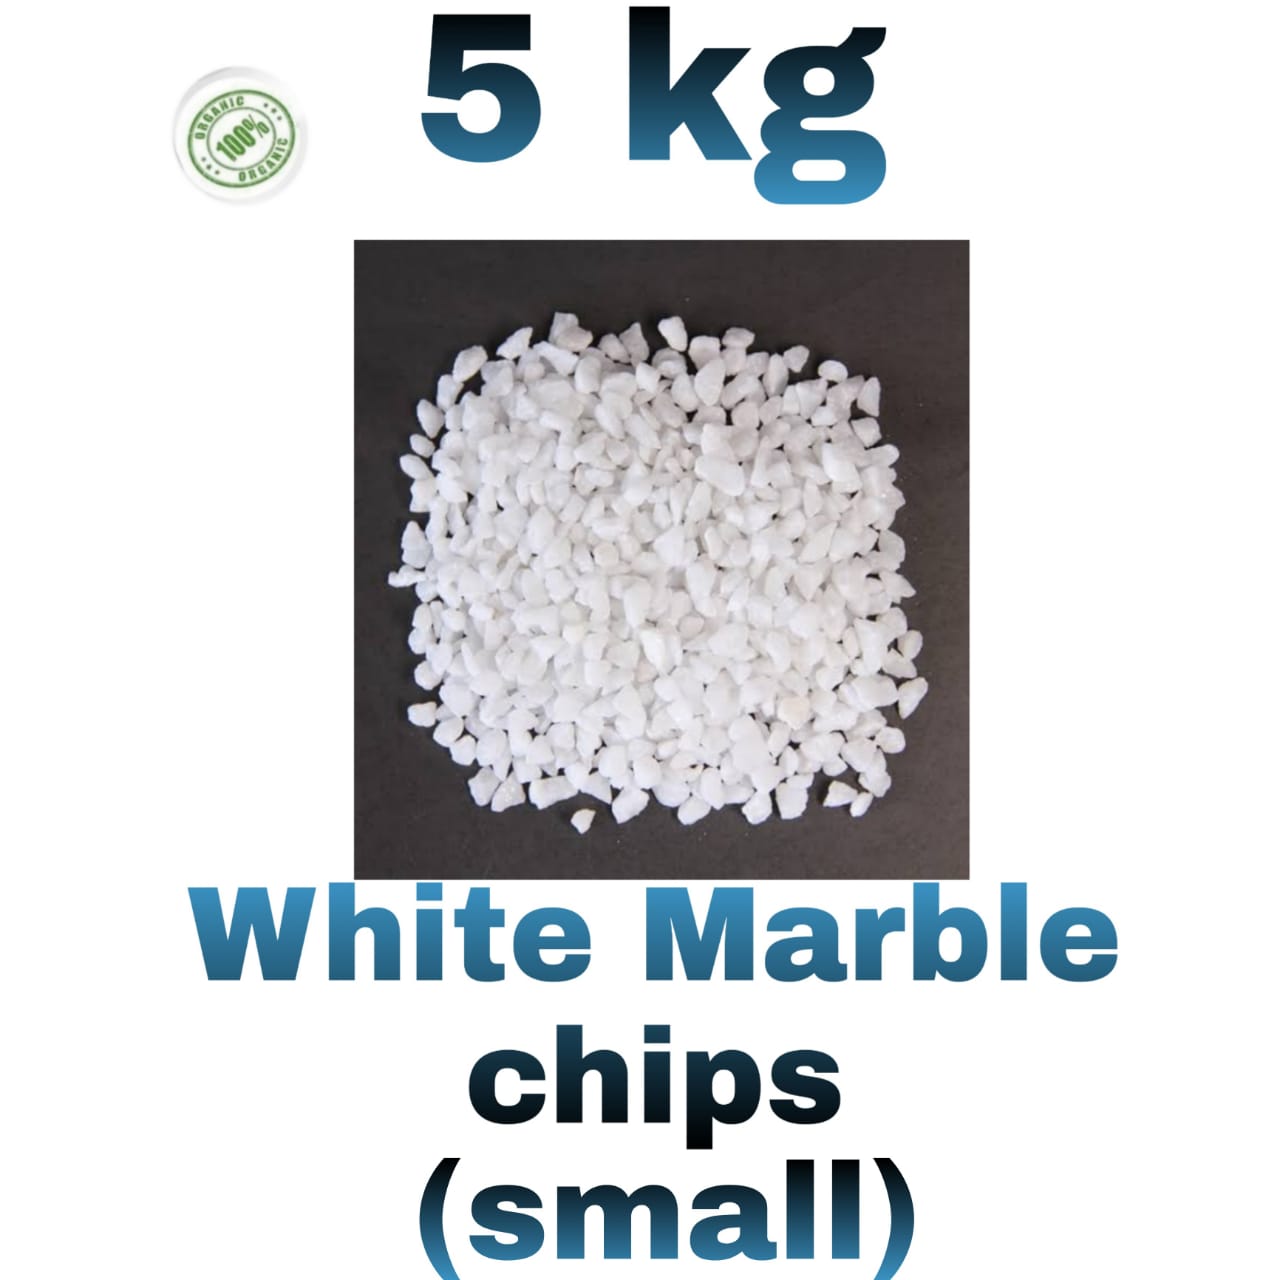 WHITE MARBLE CHIPS (SMALL) 5 KG